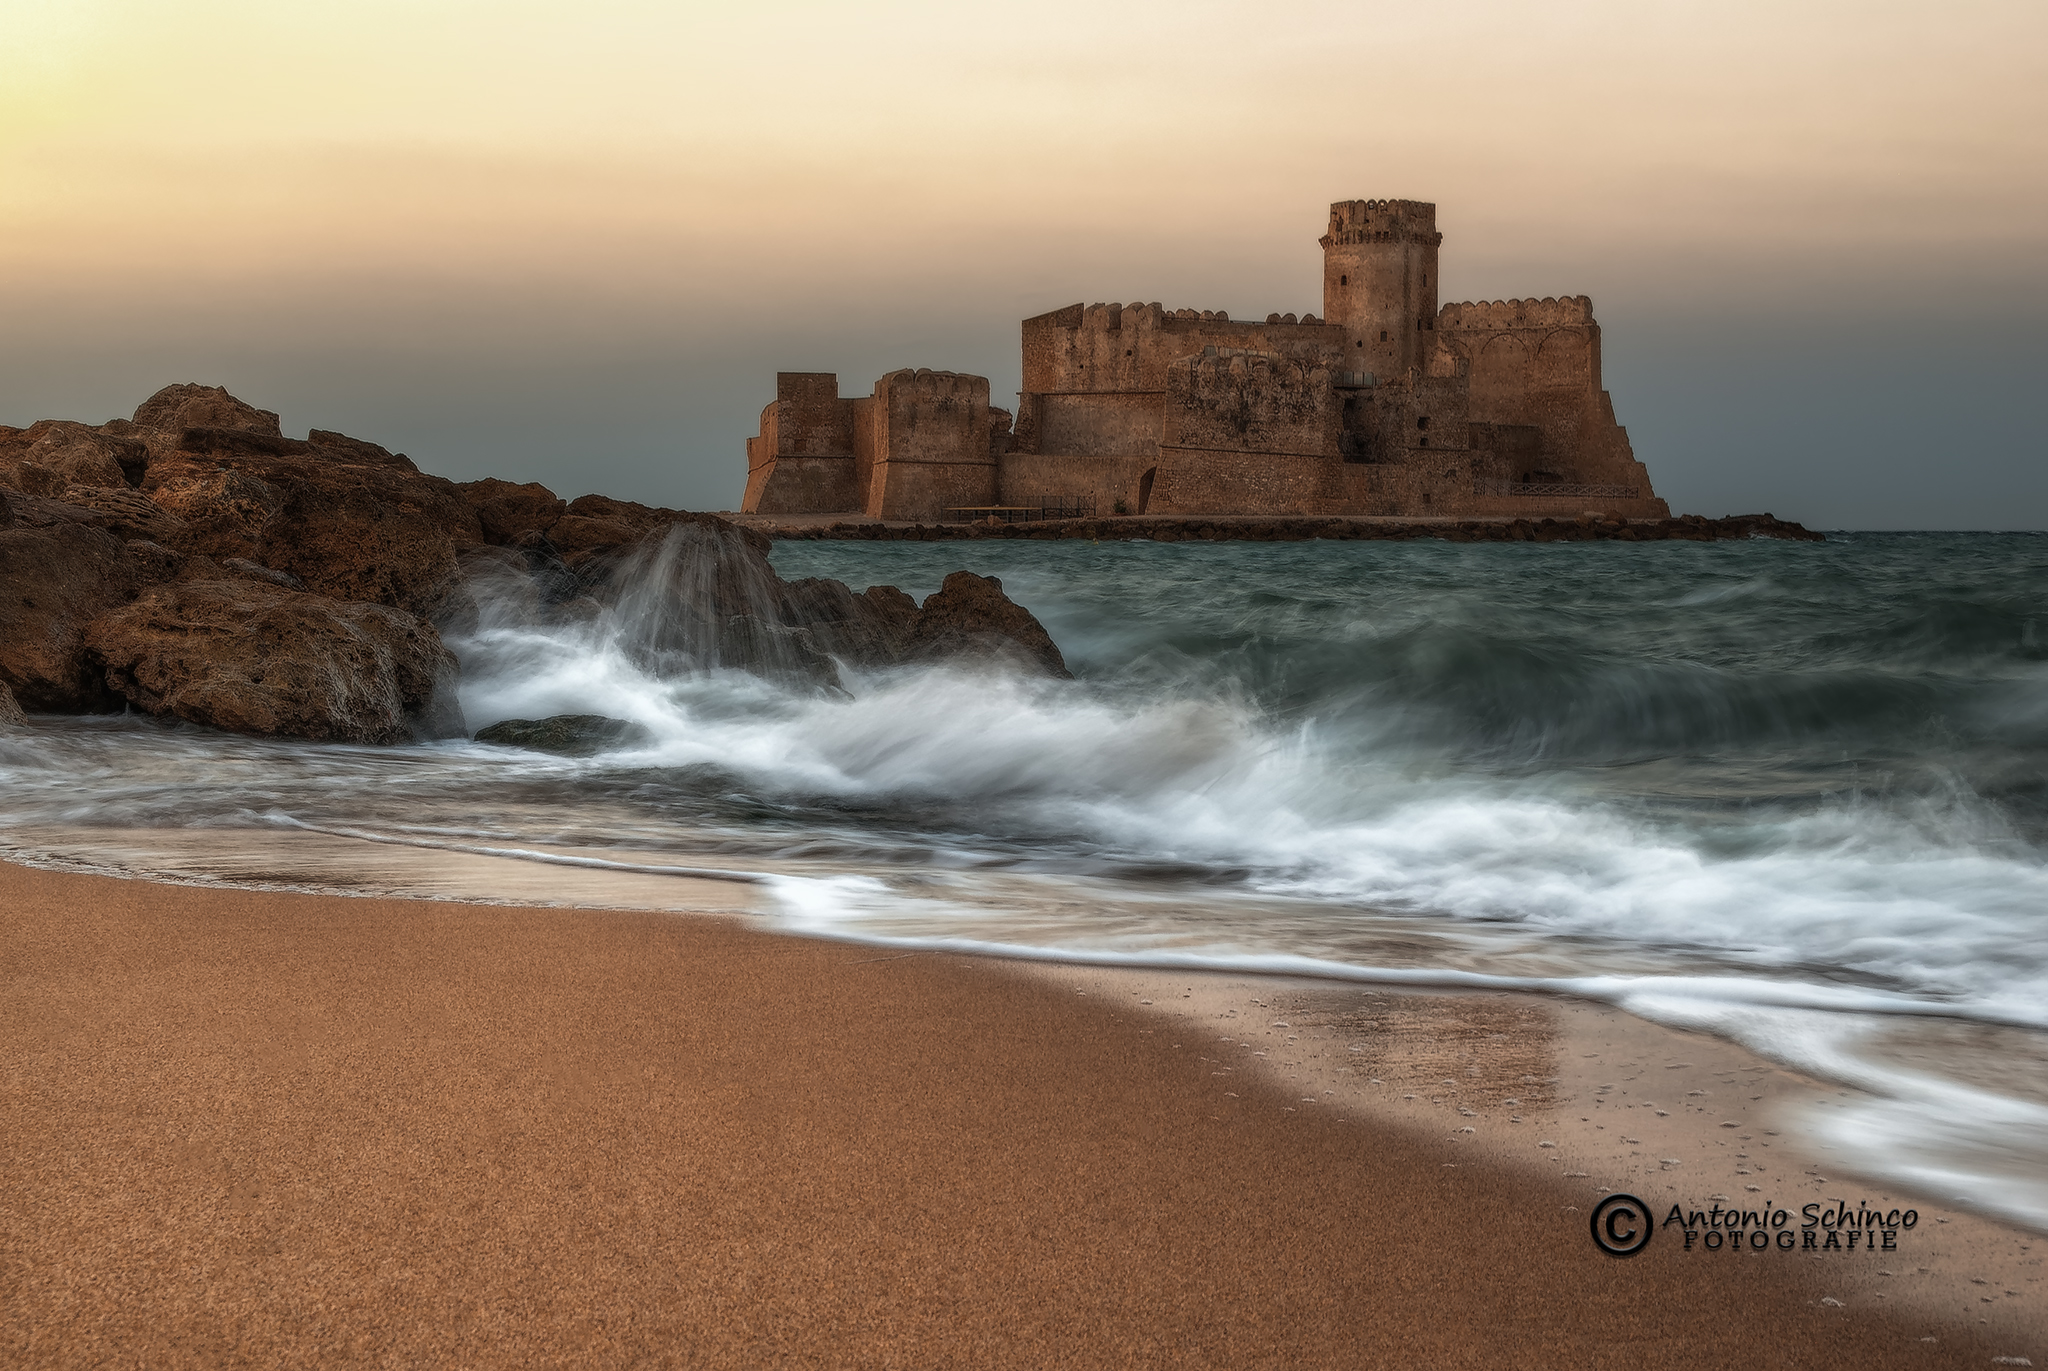 The Aragonese Castle at the early morning lights...